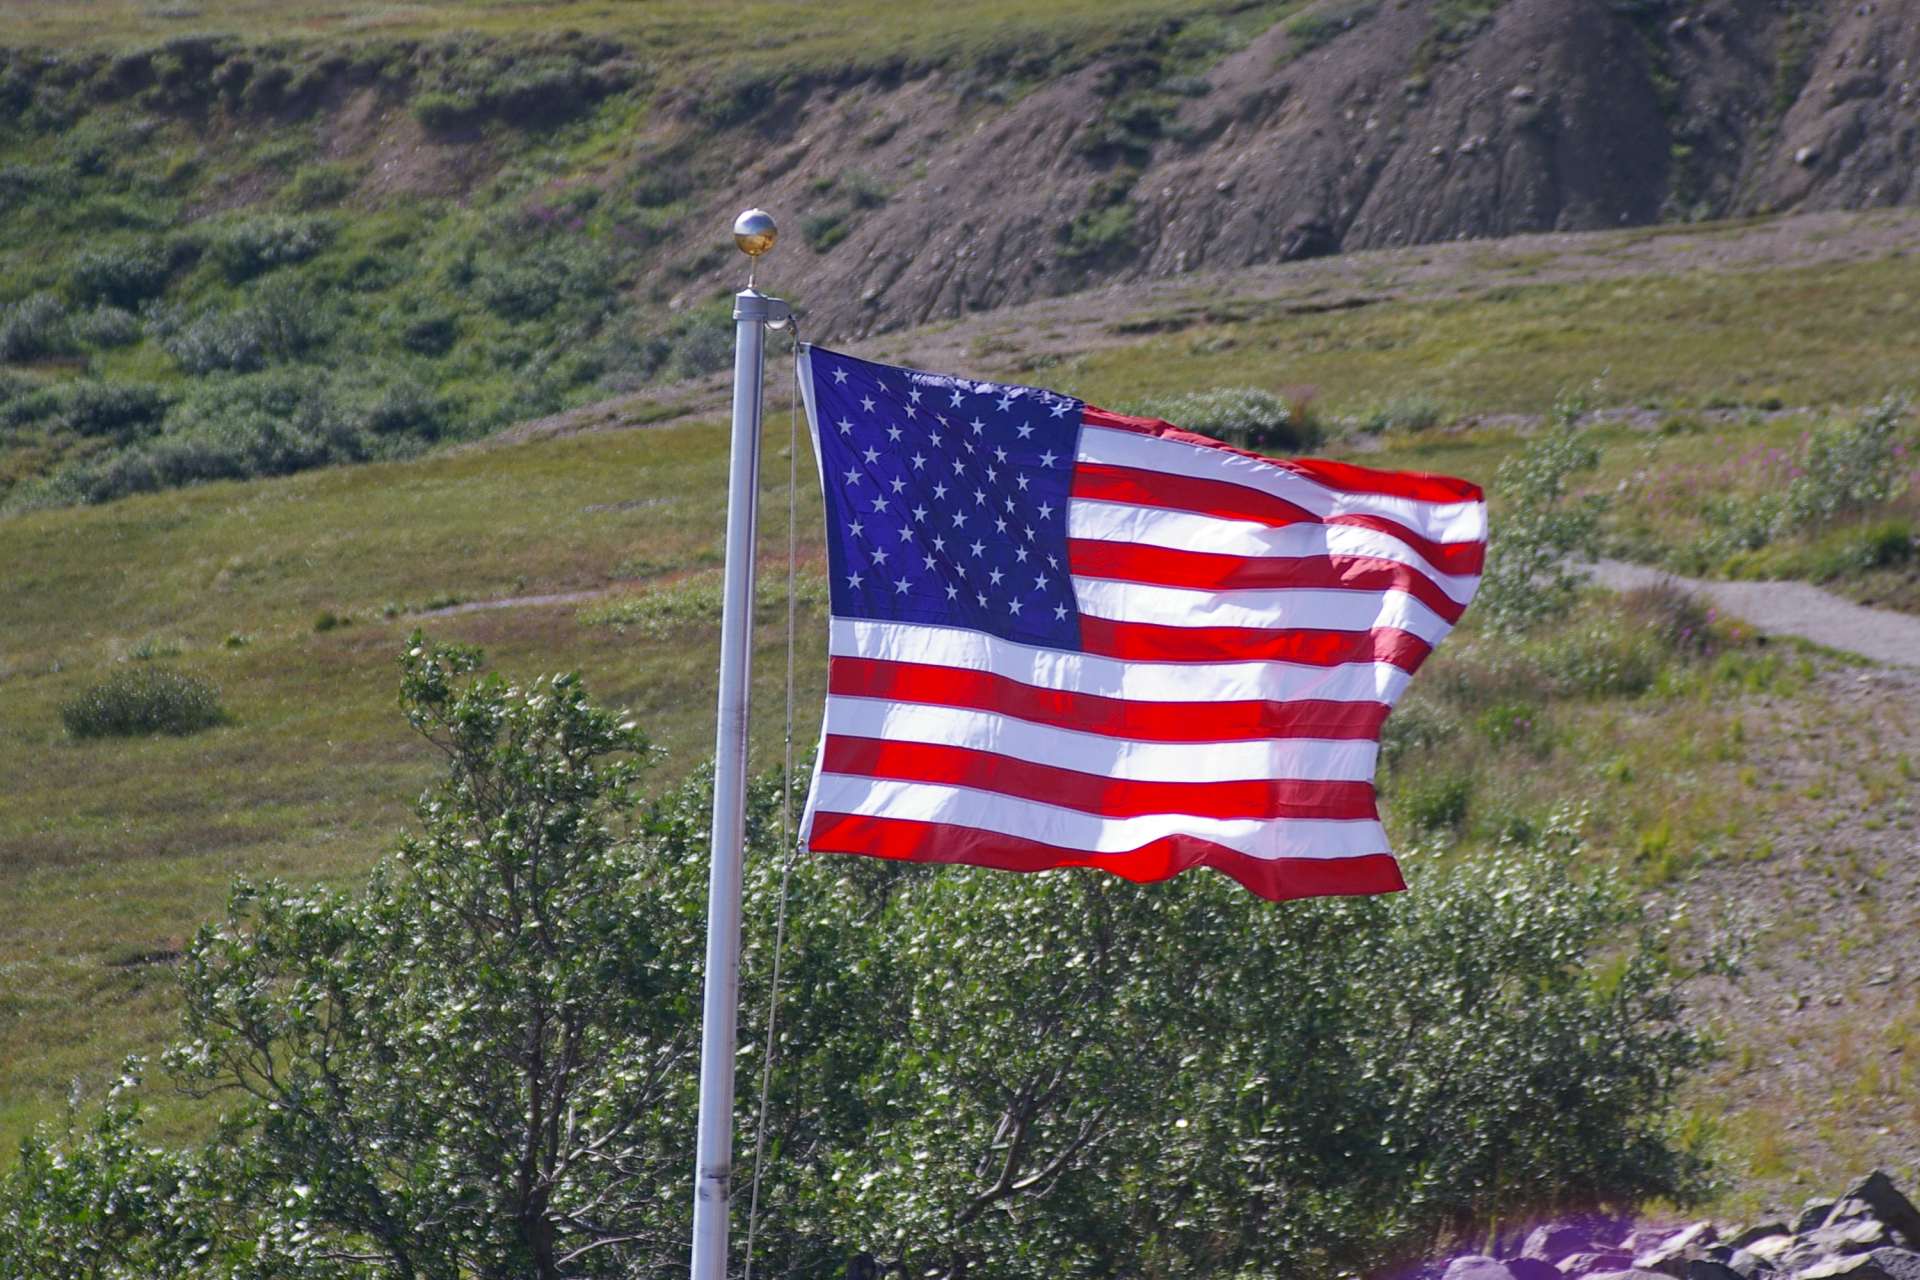 US Flag blowing in the wind during daylight with a green hill in the background